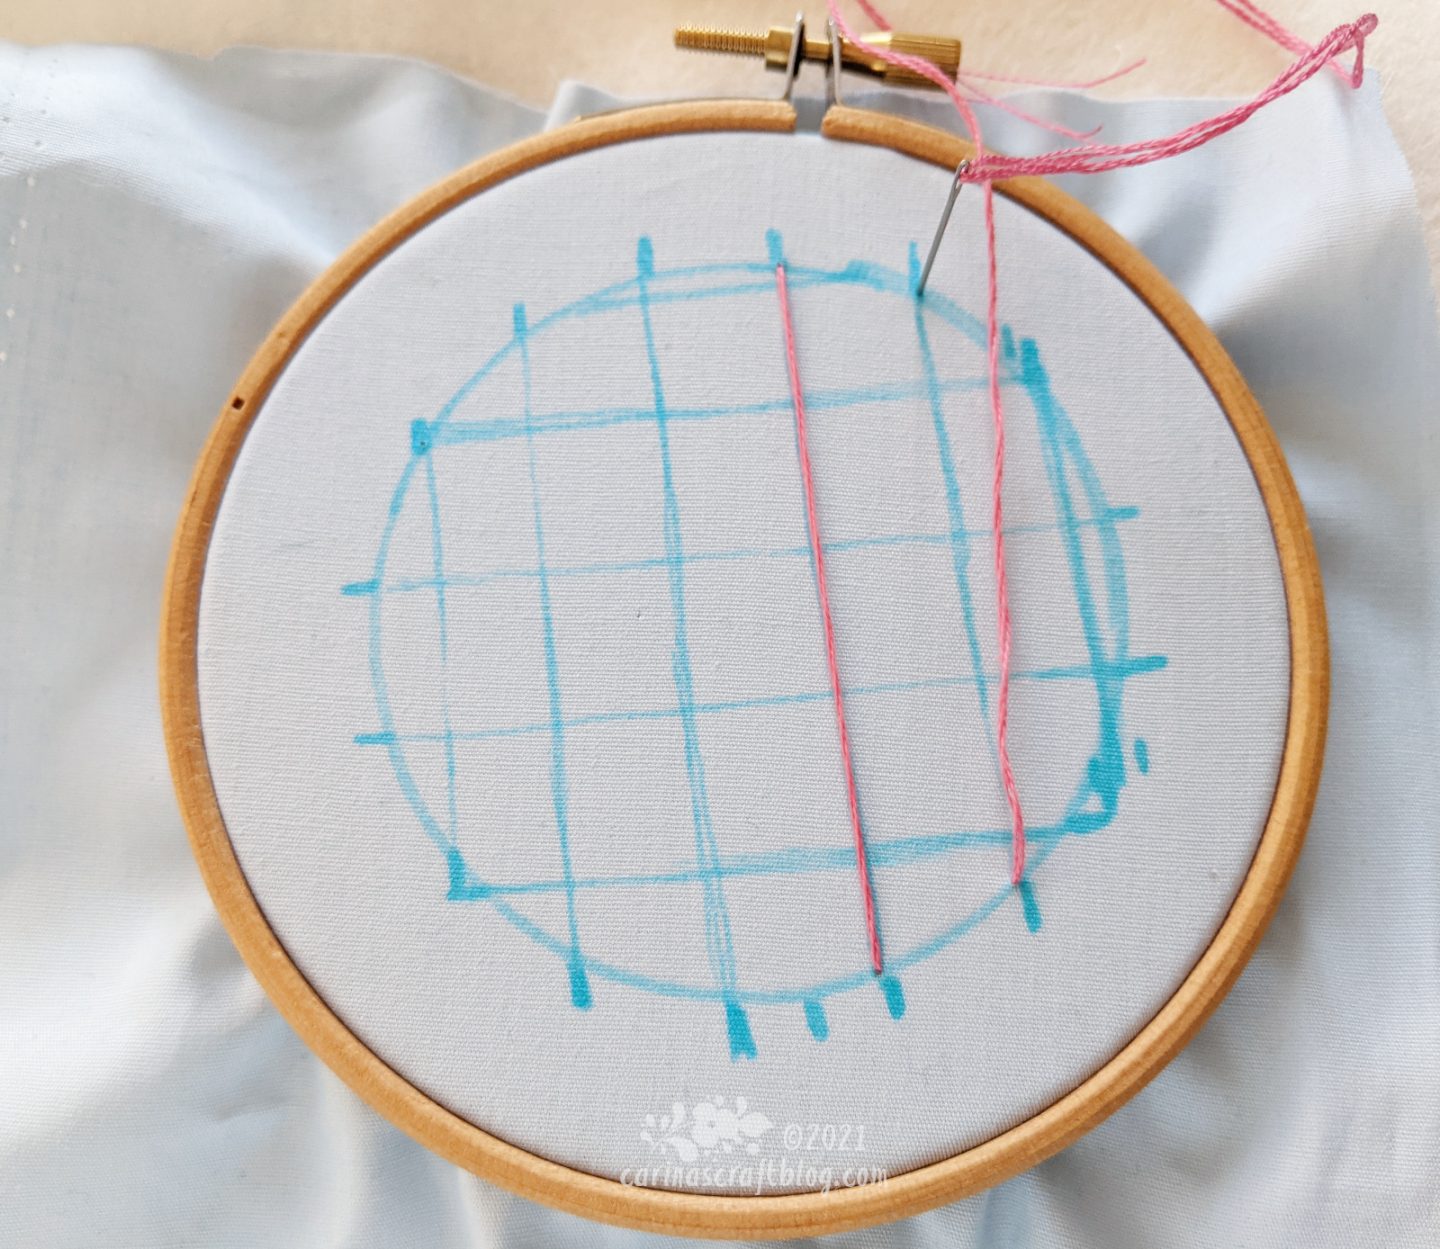 EMBROIDERY 101 // How to embroider for beginners - What you need